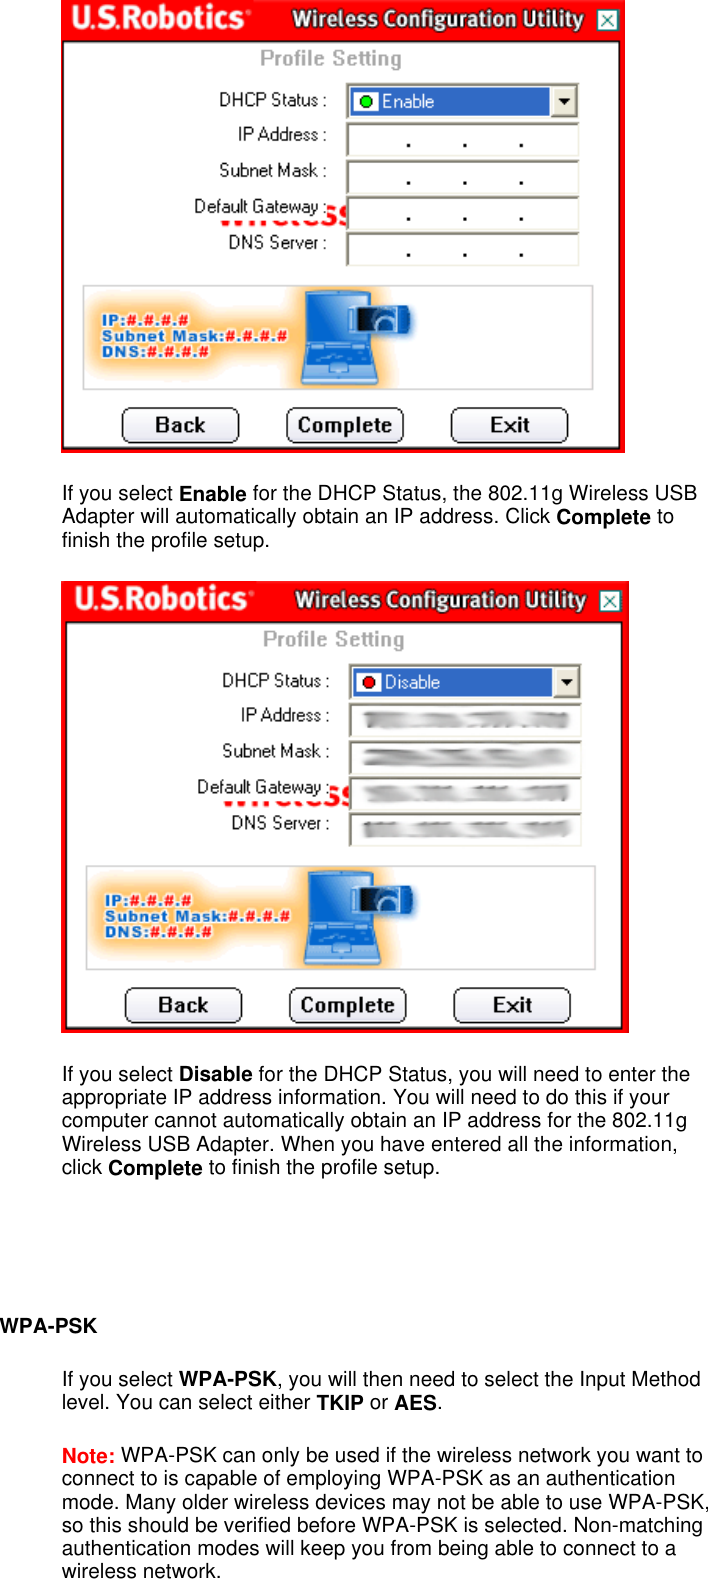  If you select Enable for the DHCP Status, the 802.11g Wireless USB Adapter will automatically obtain an IP address. Click Complete to finish the profile setup.  If you select Disable for the DHCP Status, you will need to enter the appropriate IP address information. You will need to do this if your computer cannot automatically obtain an IP address for the 802.11g Wireless USB Adapter. When you have entered all the information, click Complete to finish the profile setup.     WPA-PSK If you select WPA-PSK, you will then need to select the Input Method level. You can select either TKIP or AES.  Note: WPA-PSK can only be used if the wireless network you want to connect to is capable of employing WPA-PSK as an authentication mode. Many older wireless devices may not be able to use WPA-PSK, so this should be verified before WPA-PSK is selected. Non-matching authentication modes will keep you from being able to connect to a wireless network. 